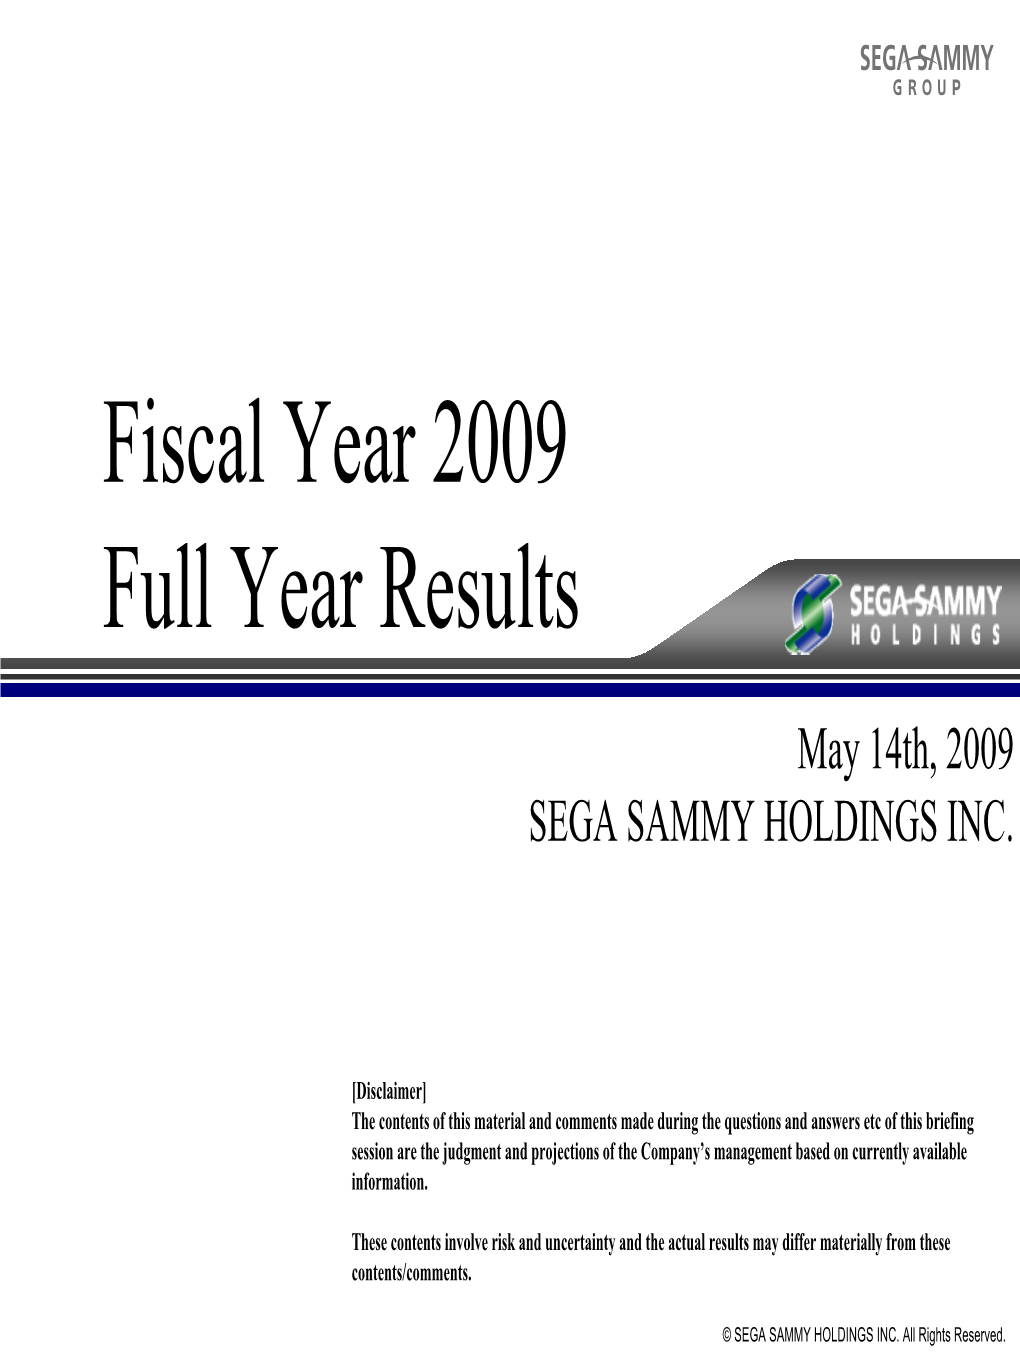 Fiscal Year 2009 Full Year Results